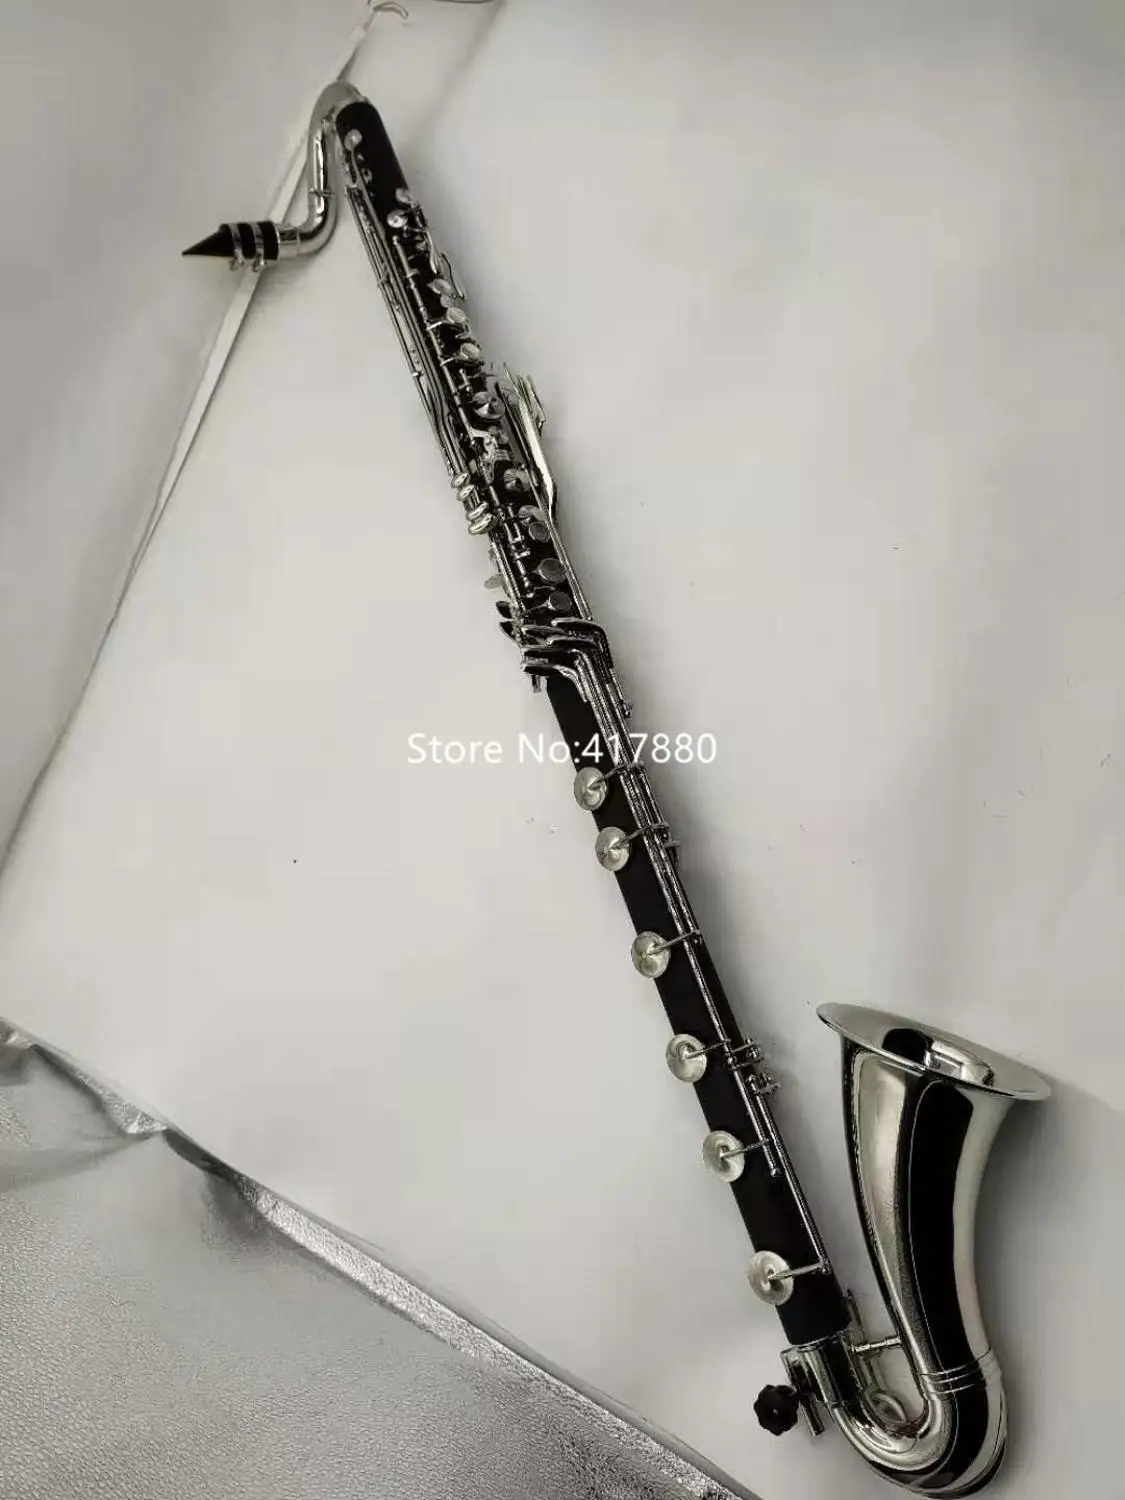 

New Arrival MARGEWATE Low C Clarinet Silver Plated Keys Bass Clarinet Professional Musical Instrument With Mouthpiece Case